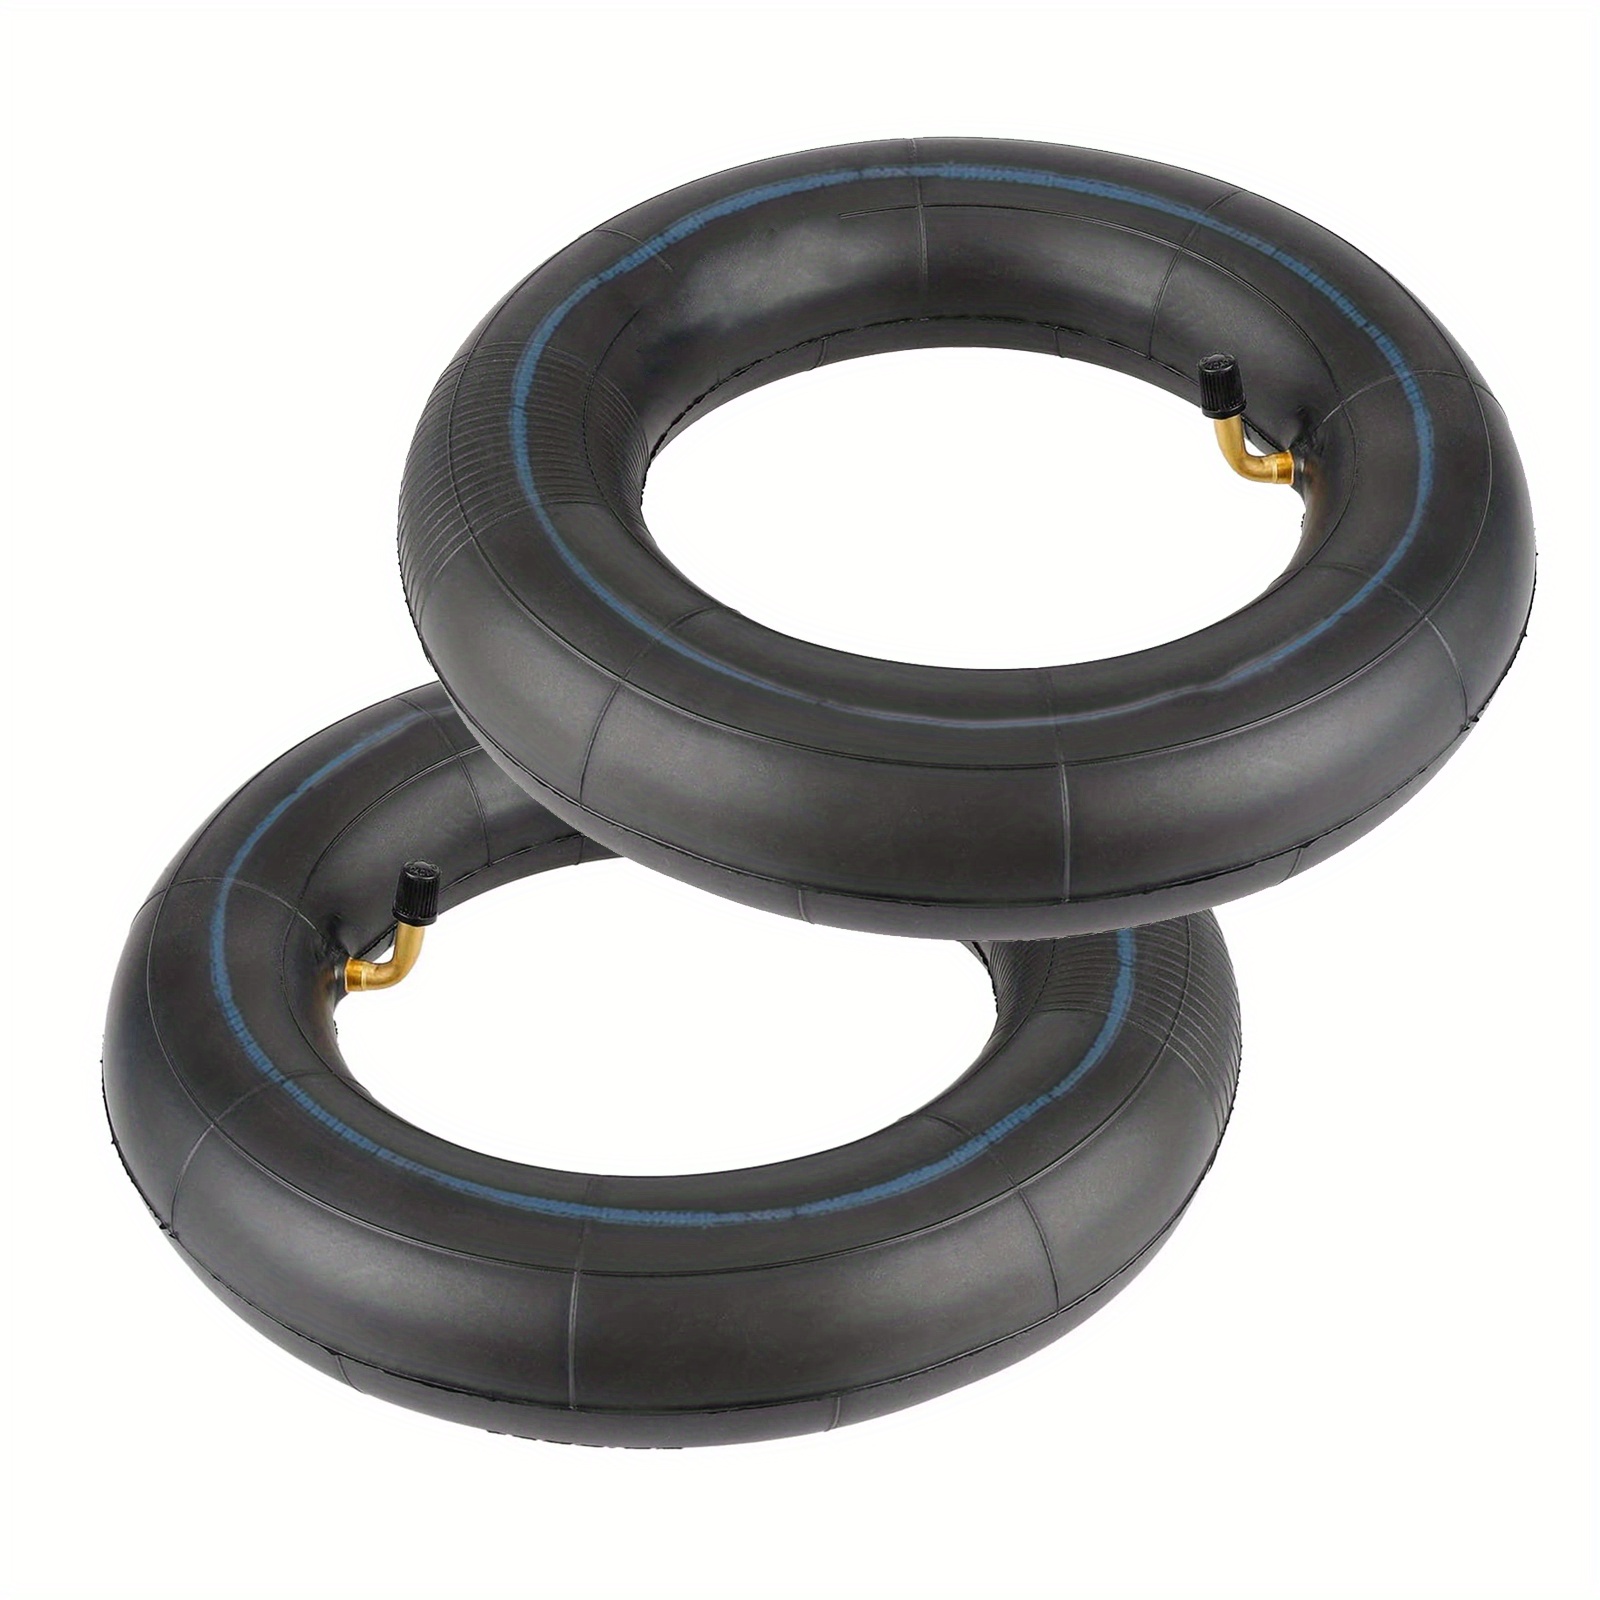 4 x Inner Tube 3.00-4 Bent Valve Trolley Mobility Scooter Sack